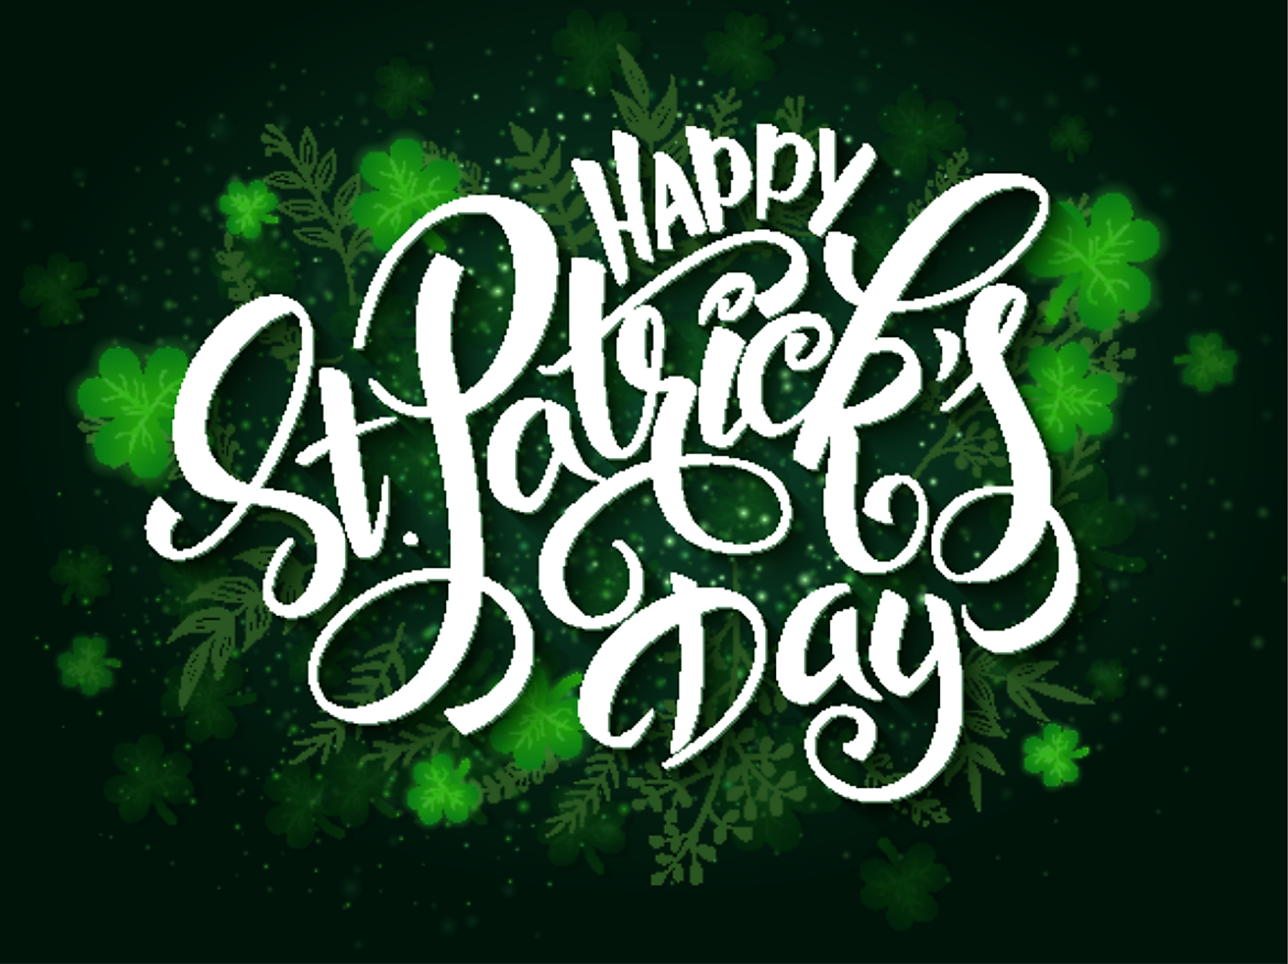 Saint Patrick’s Day is known for all things Irish including music, food, shamrock, and parades throughout Ireland and other parts of the world.